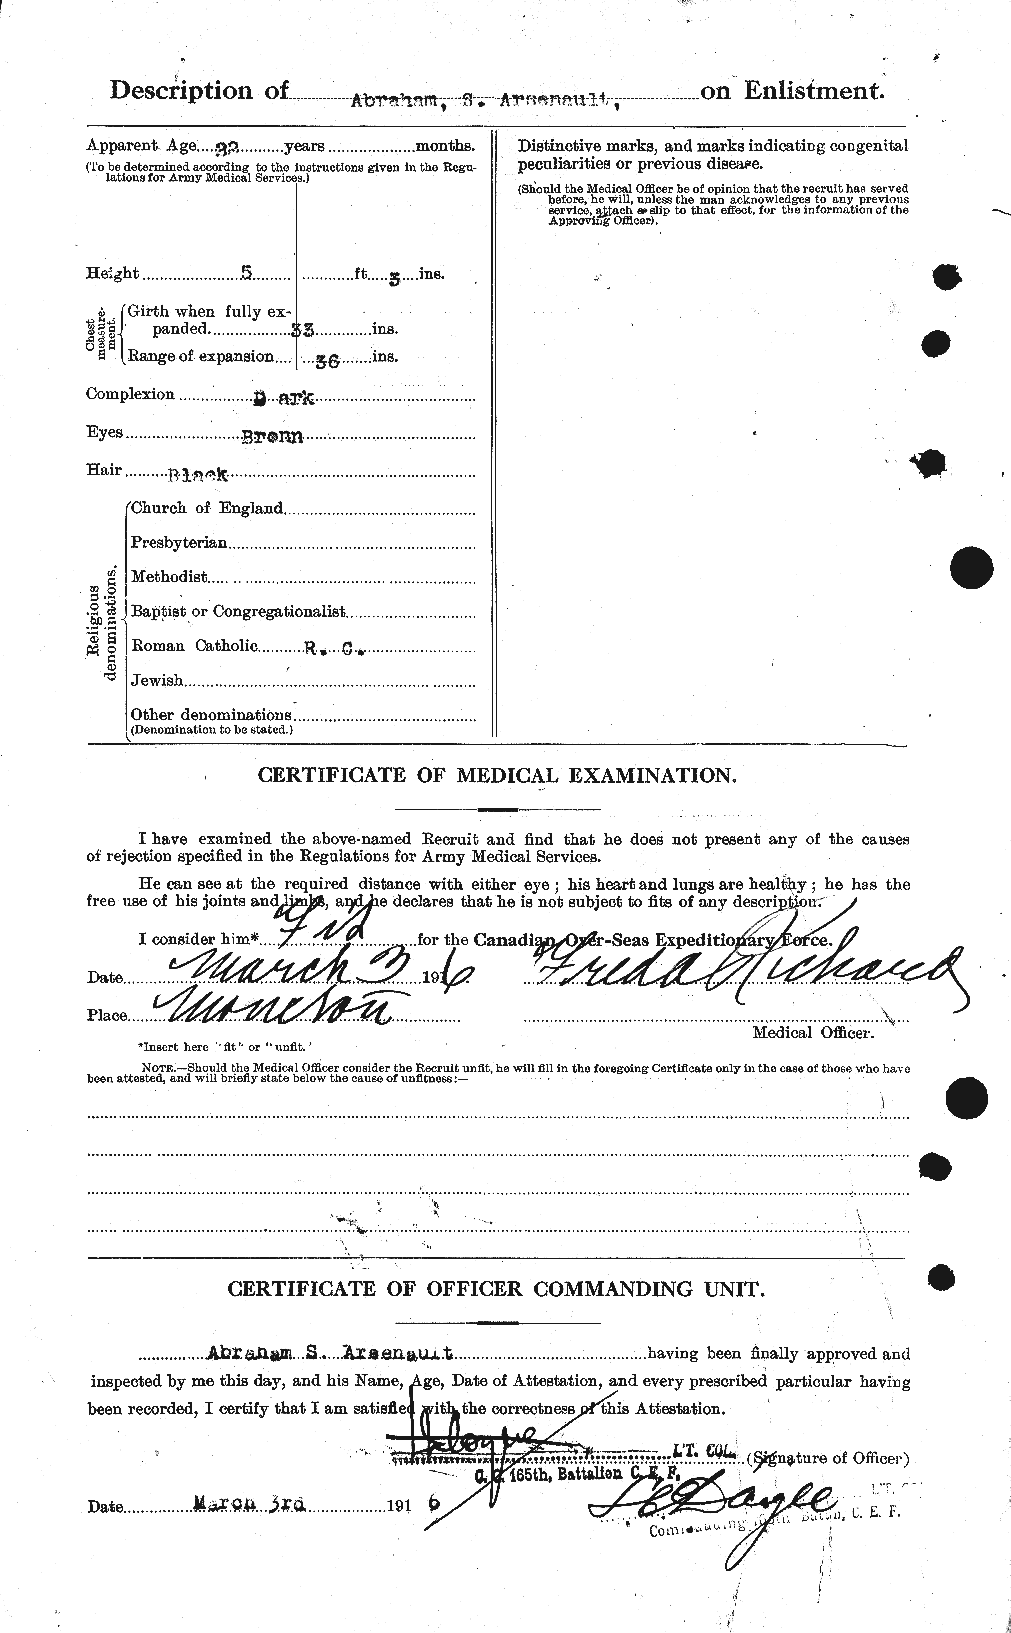 Personnel Records of the First World War - CEF 214258b